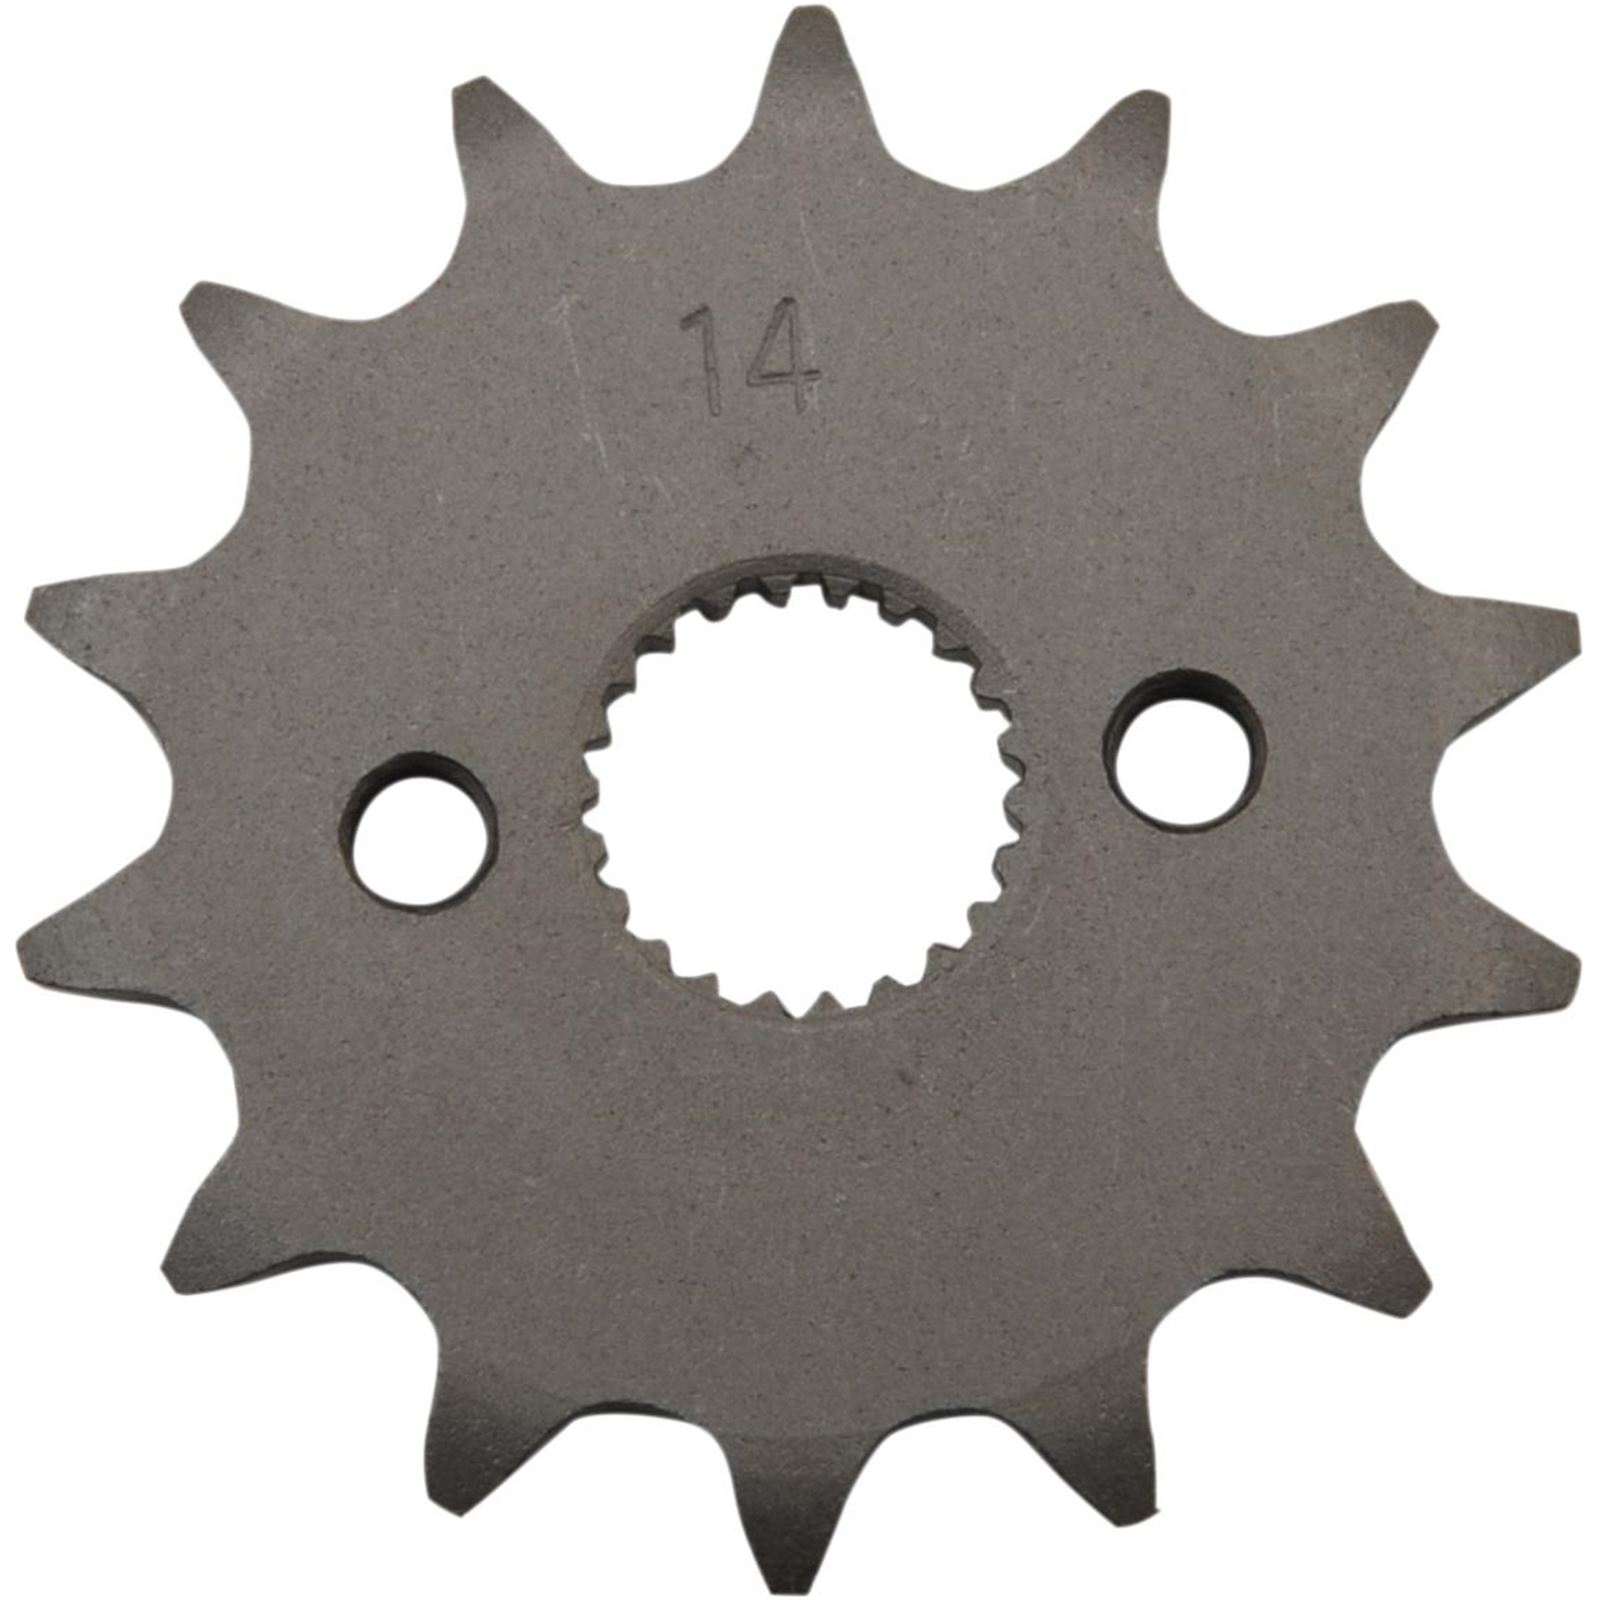 Parts Unlimited Counter Shaft Sprocket for Honda 420 - 14-Tooth